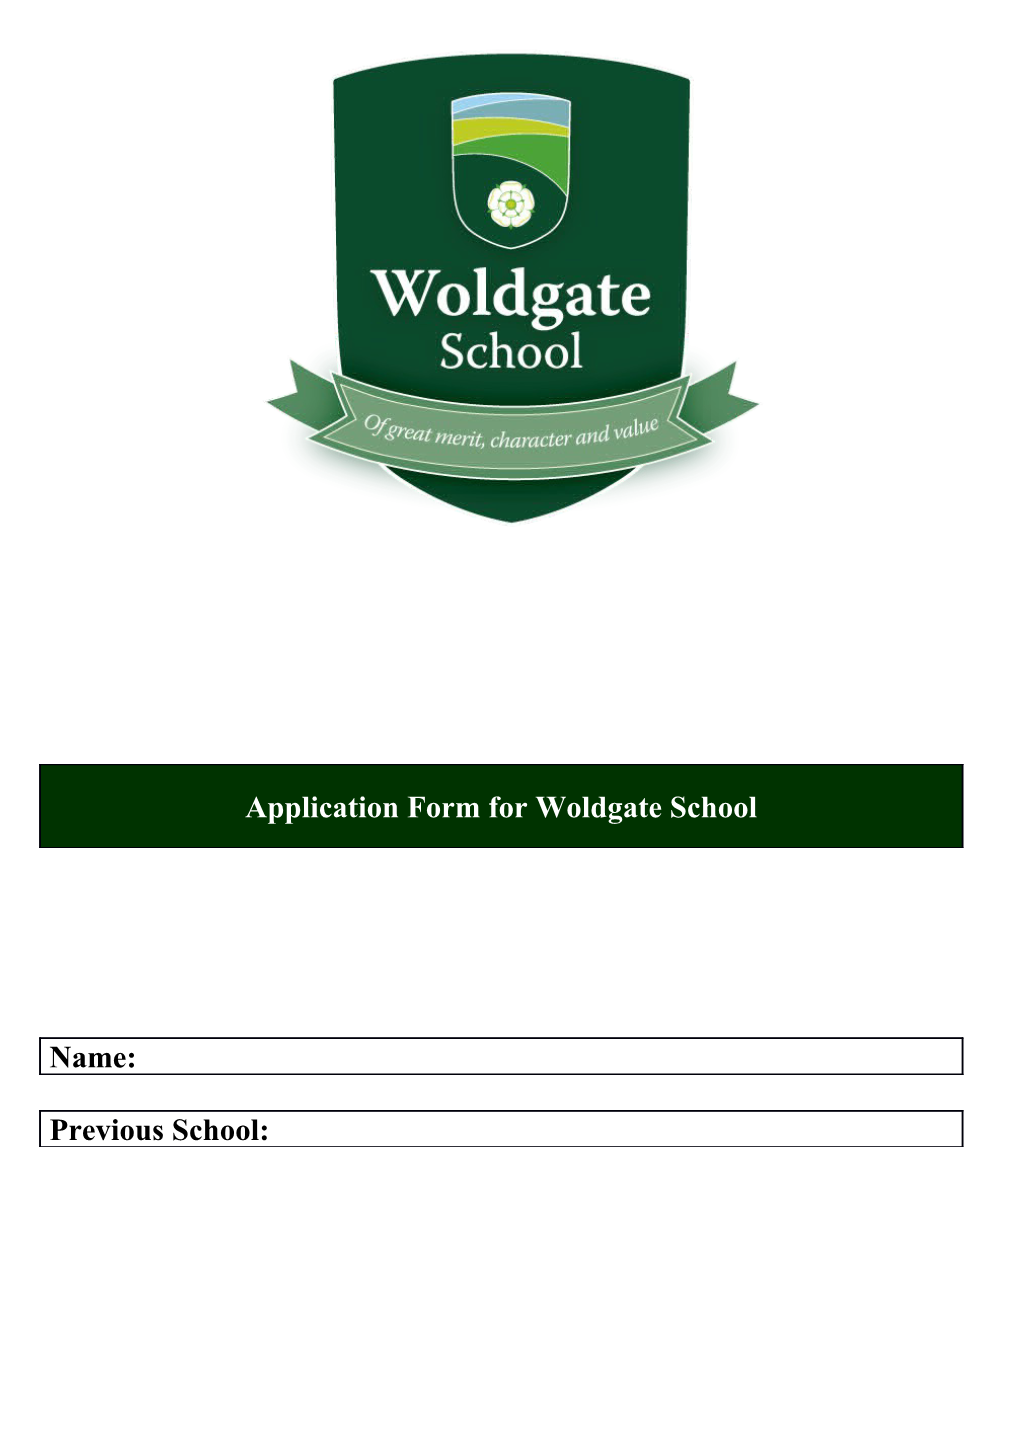 Welcome to Woldgate School and Sixth Form College